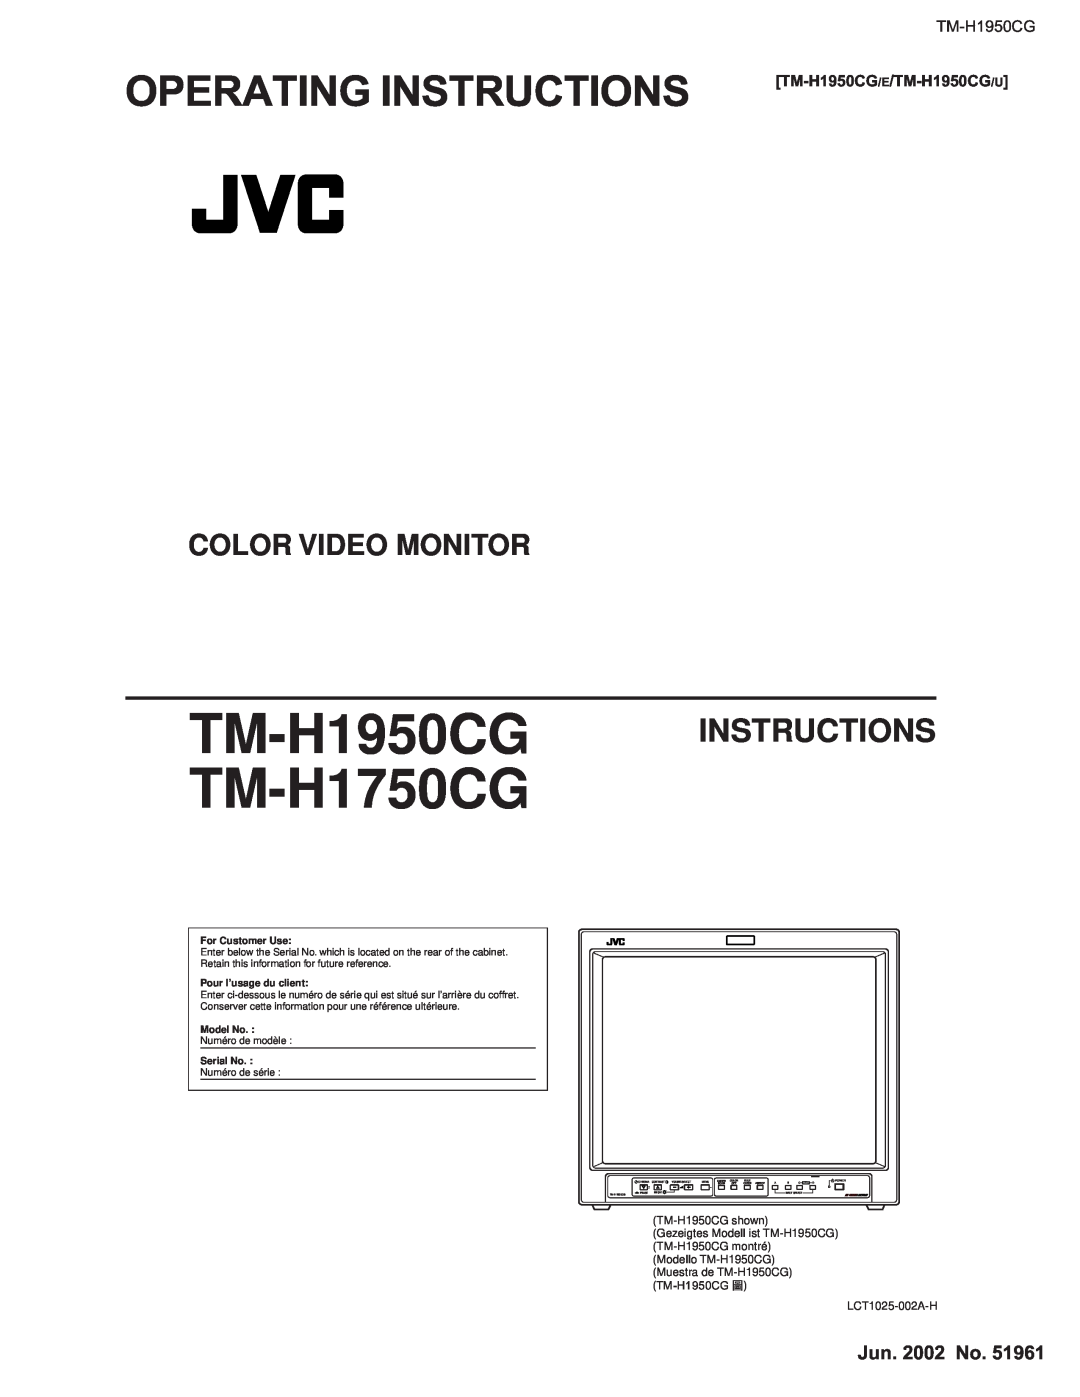 JVC operating instructions Color Video Monitor, TM-H1950CG TM-H1950CG/E/TM-H1950CG/U, TM-H1950CG TM-H1750CG, Model No 